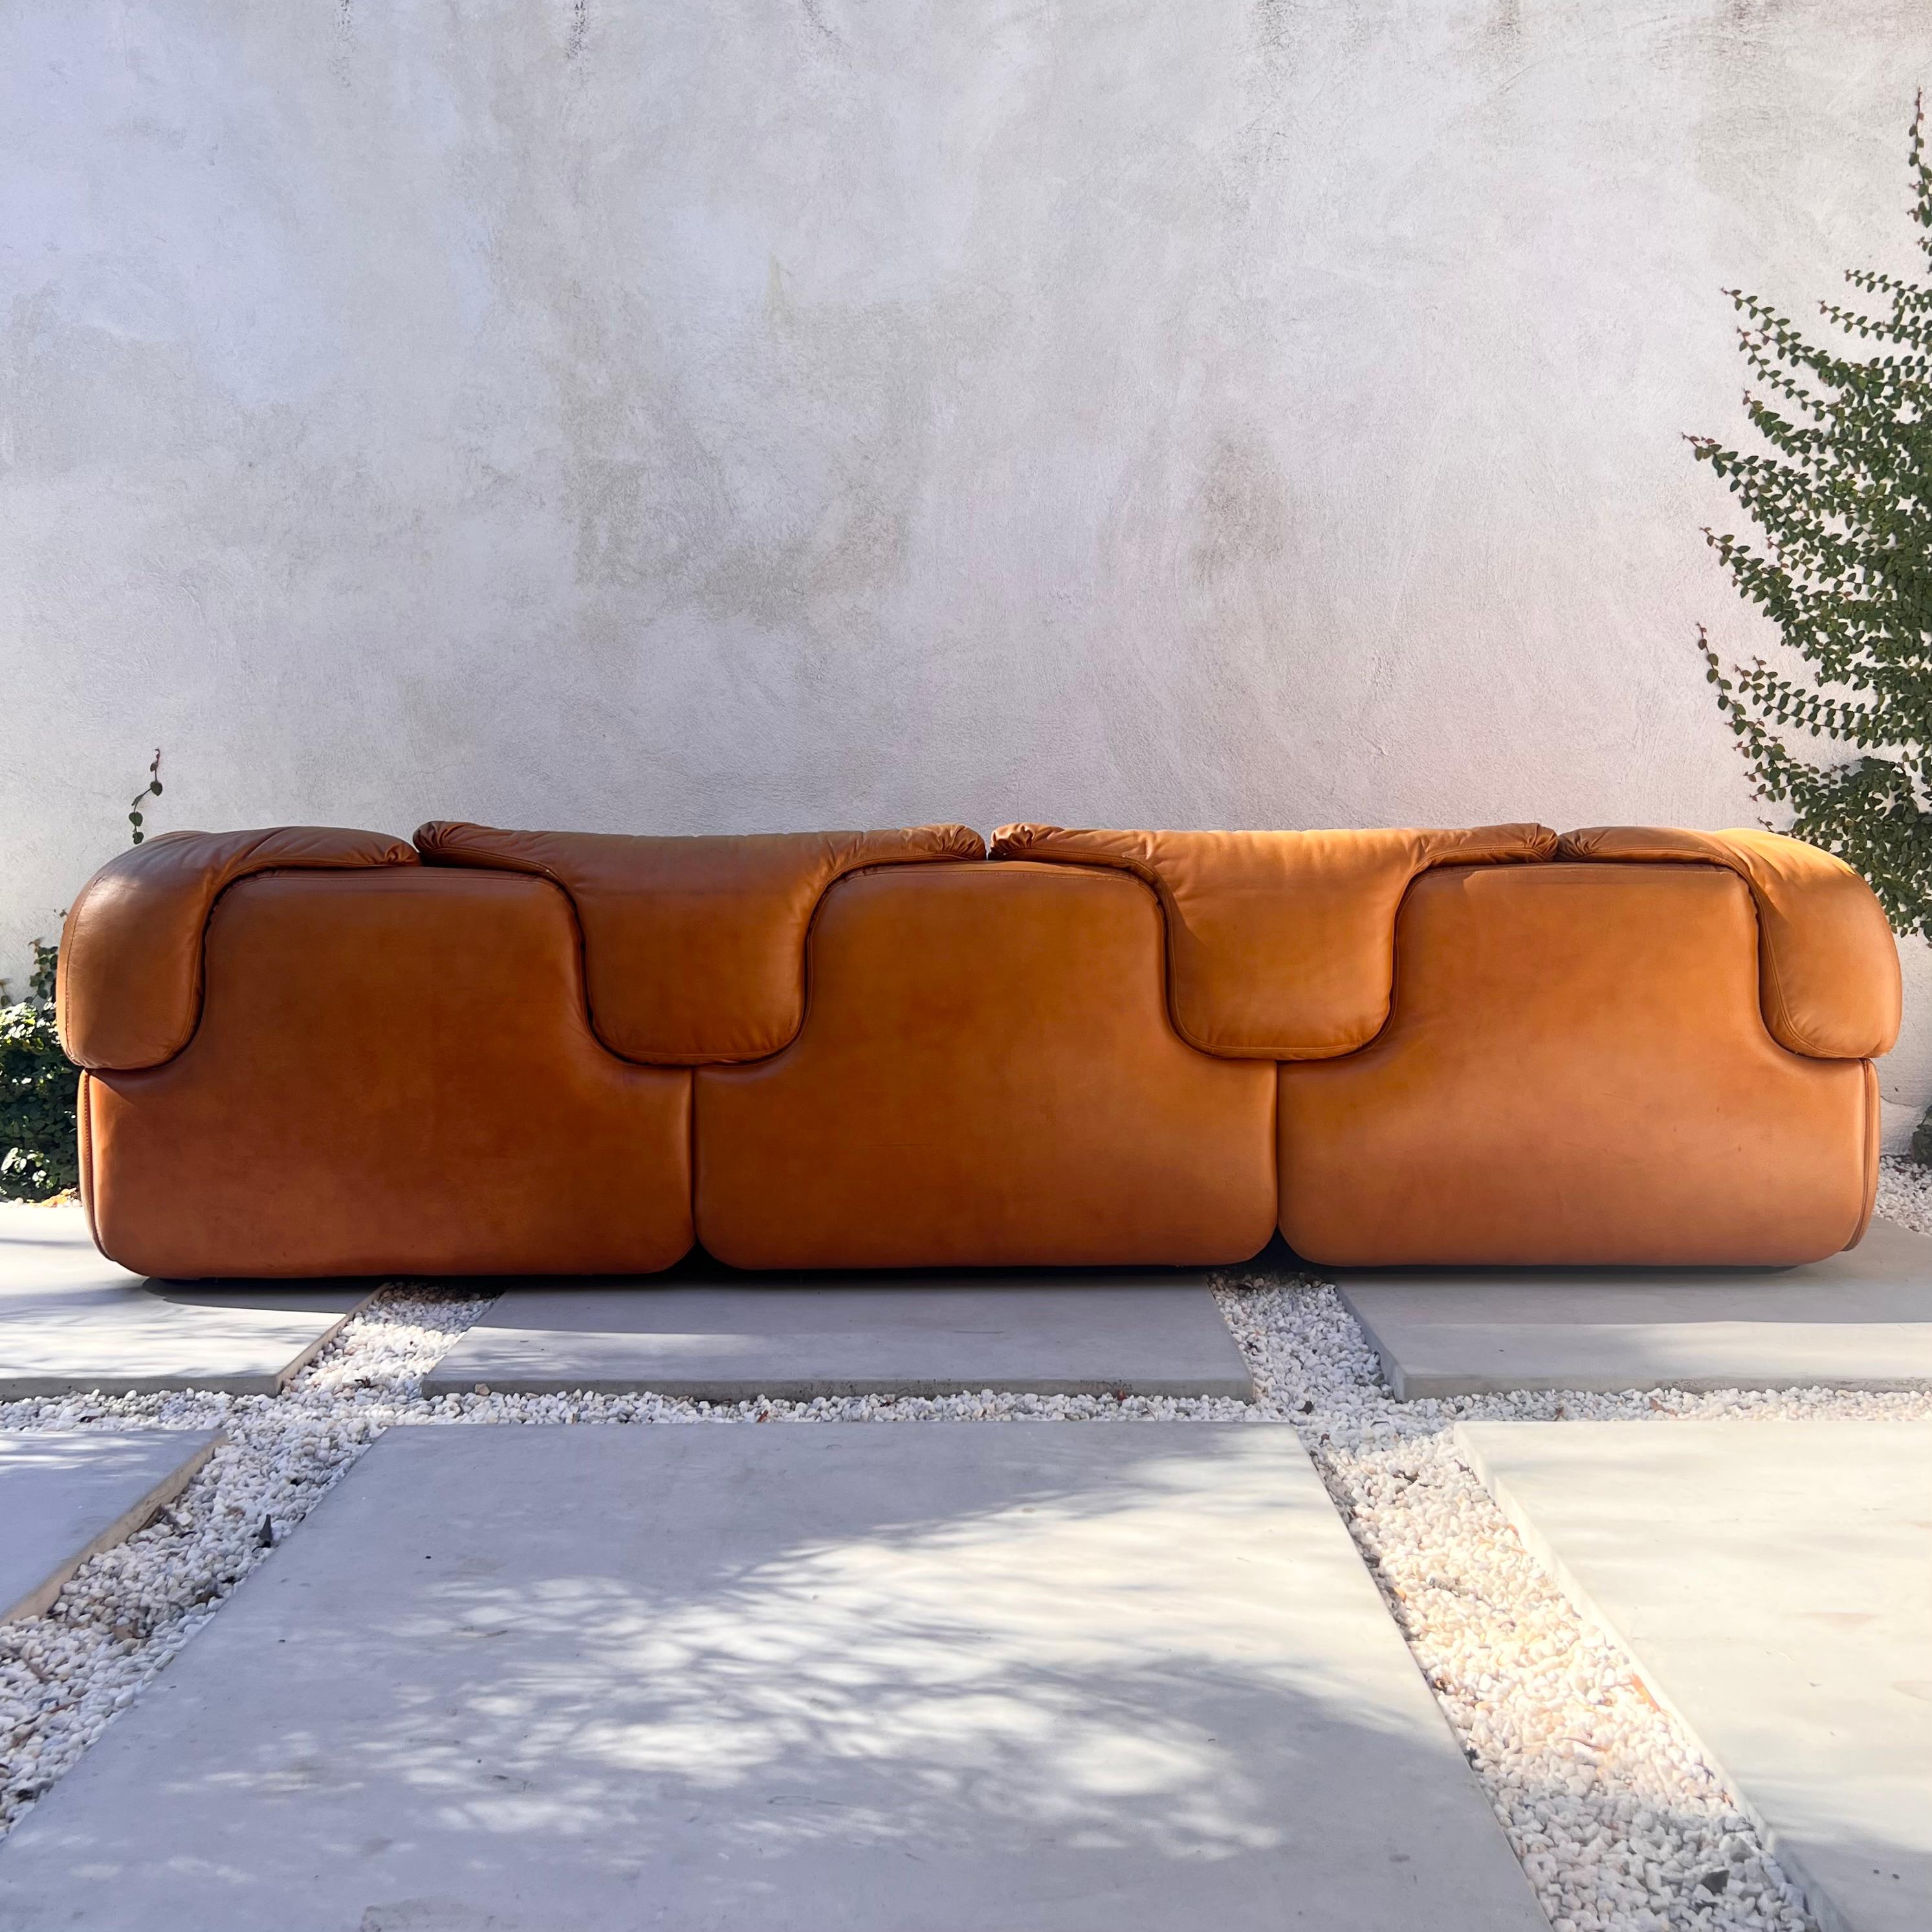 A vintage Italian « Confidential » 3-seater sofa by Alberto Roselli for Saporiti Italia, circa 1972. In cognac leather. Patina throughout and some significant wear but overall good condition. Pick up in LA or we ship worldwide; please don’t hesitate